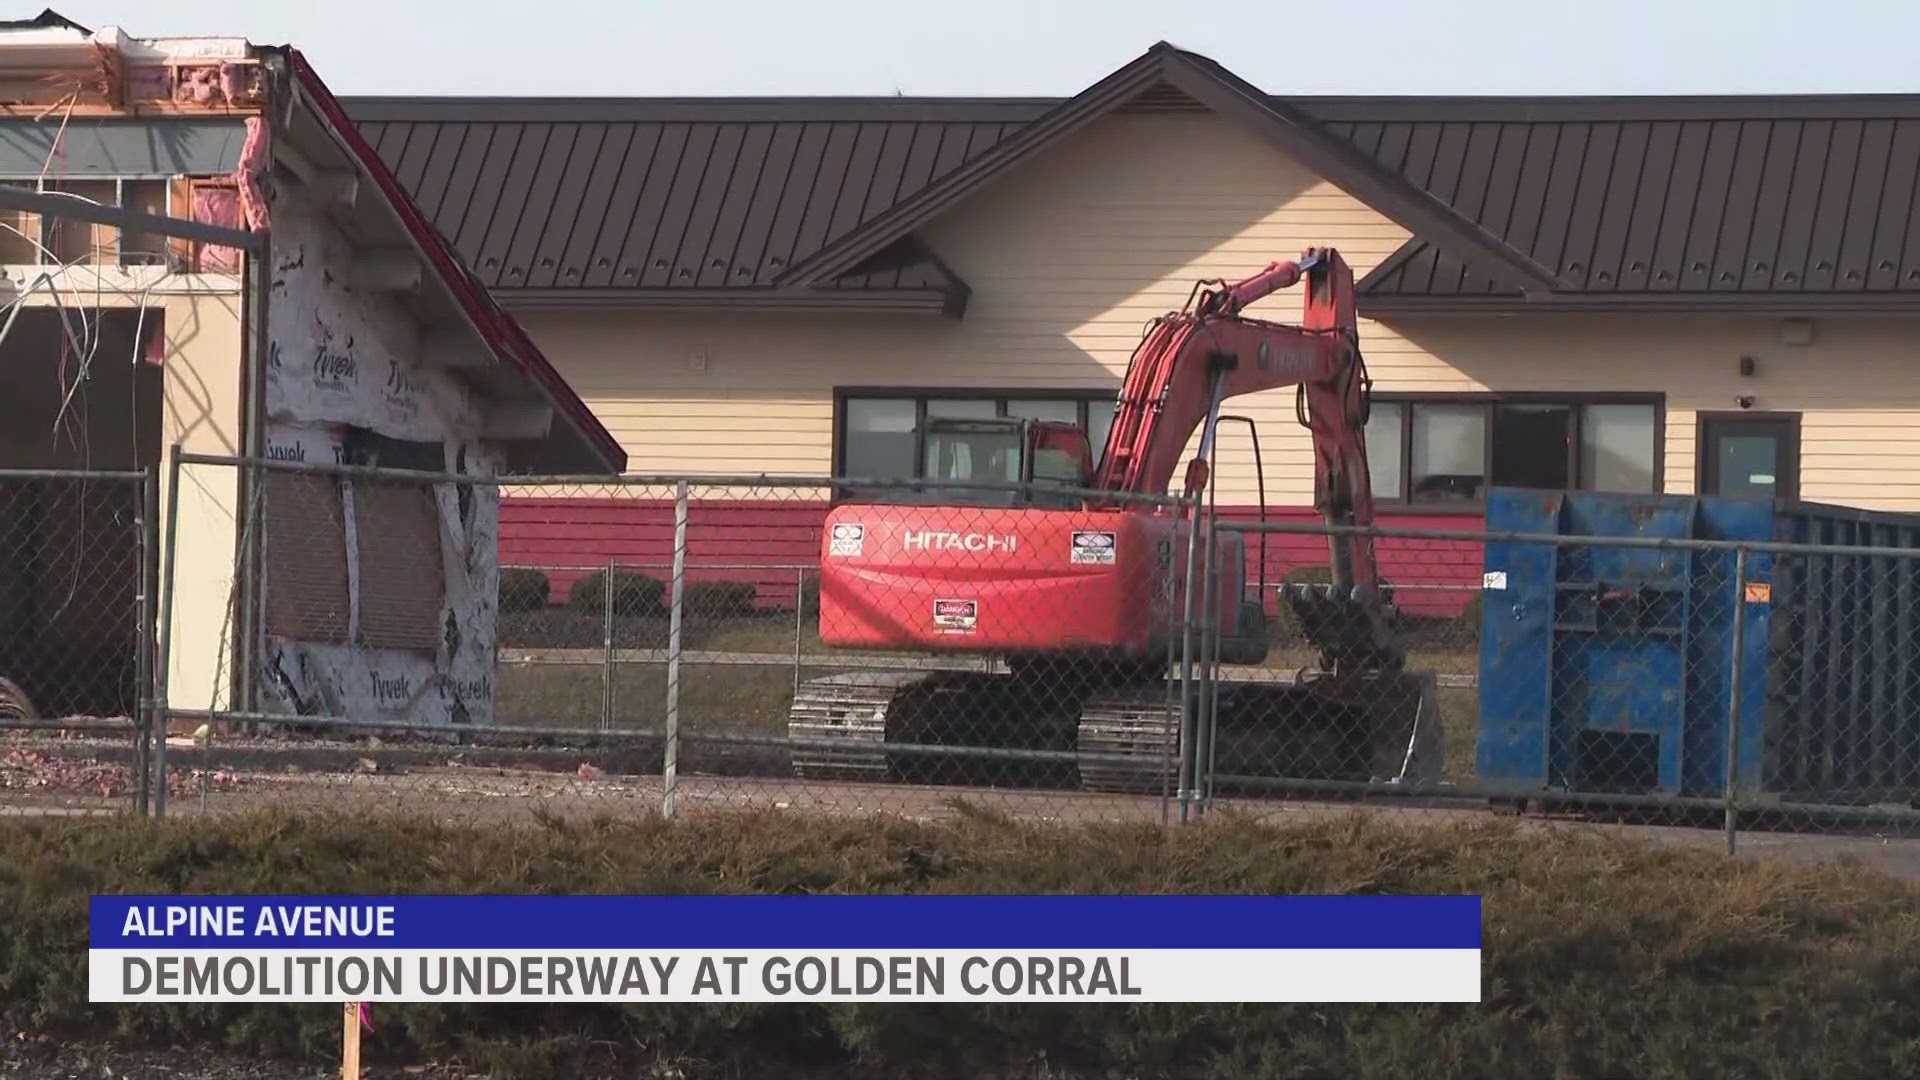 Crews are demolishing the former Golden Corral on Alpine Avenue to make room for a Chick-fil-A. It's the last Golden Corral on this side of the state.